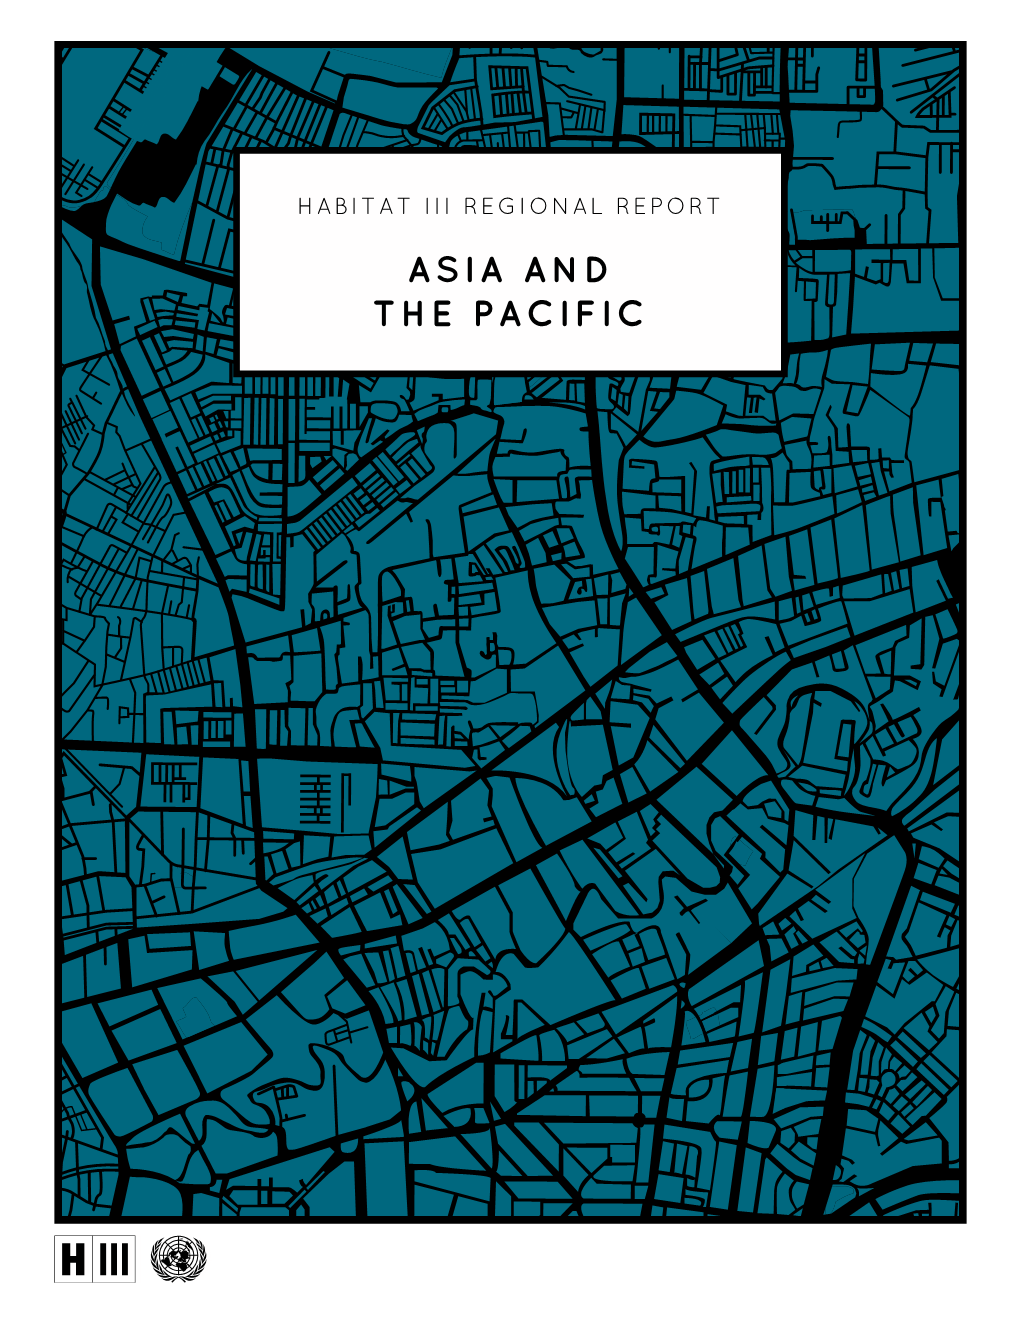 Regional Report for Asia and the Pacific